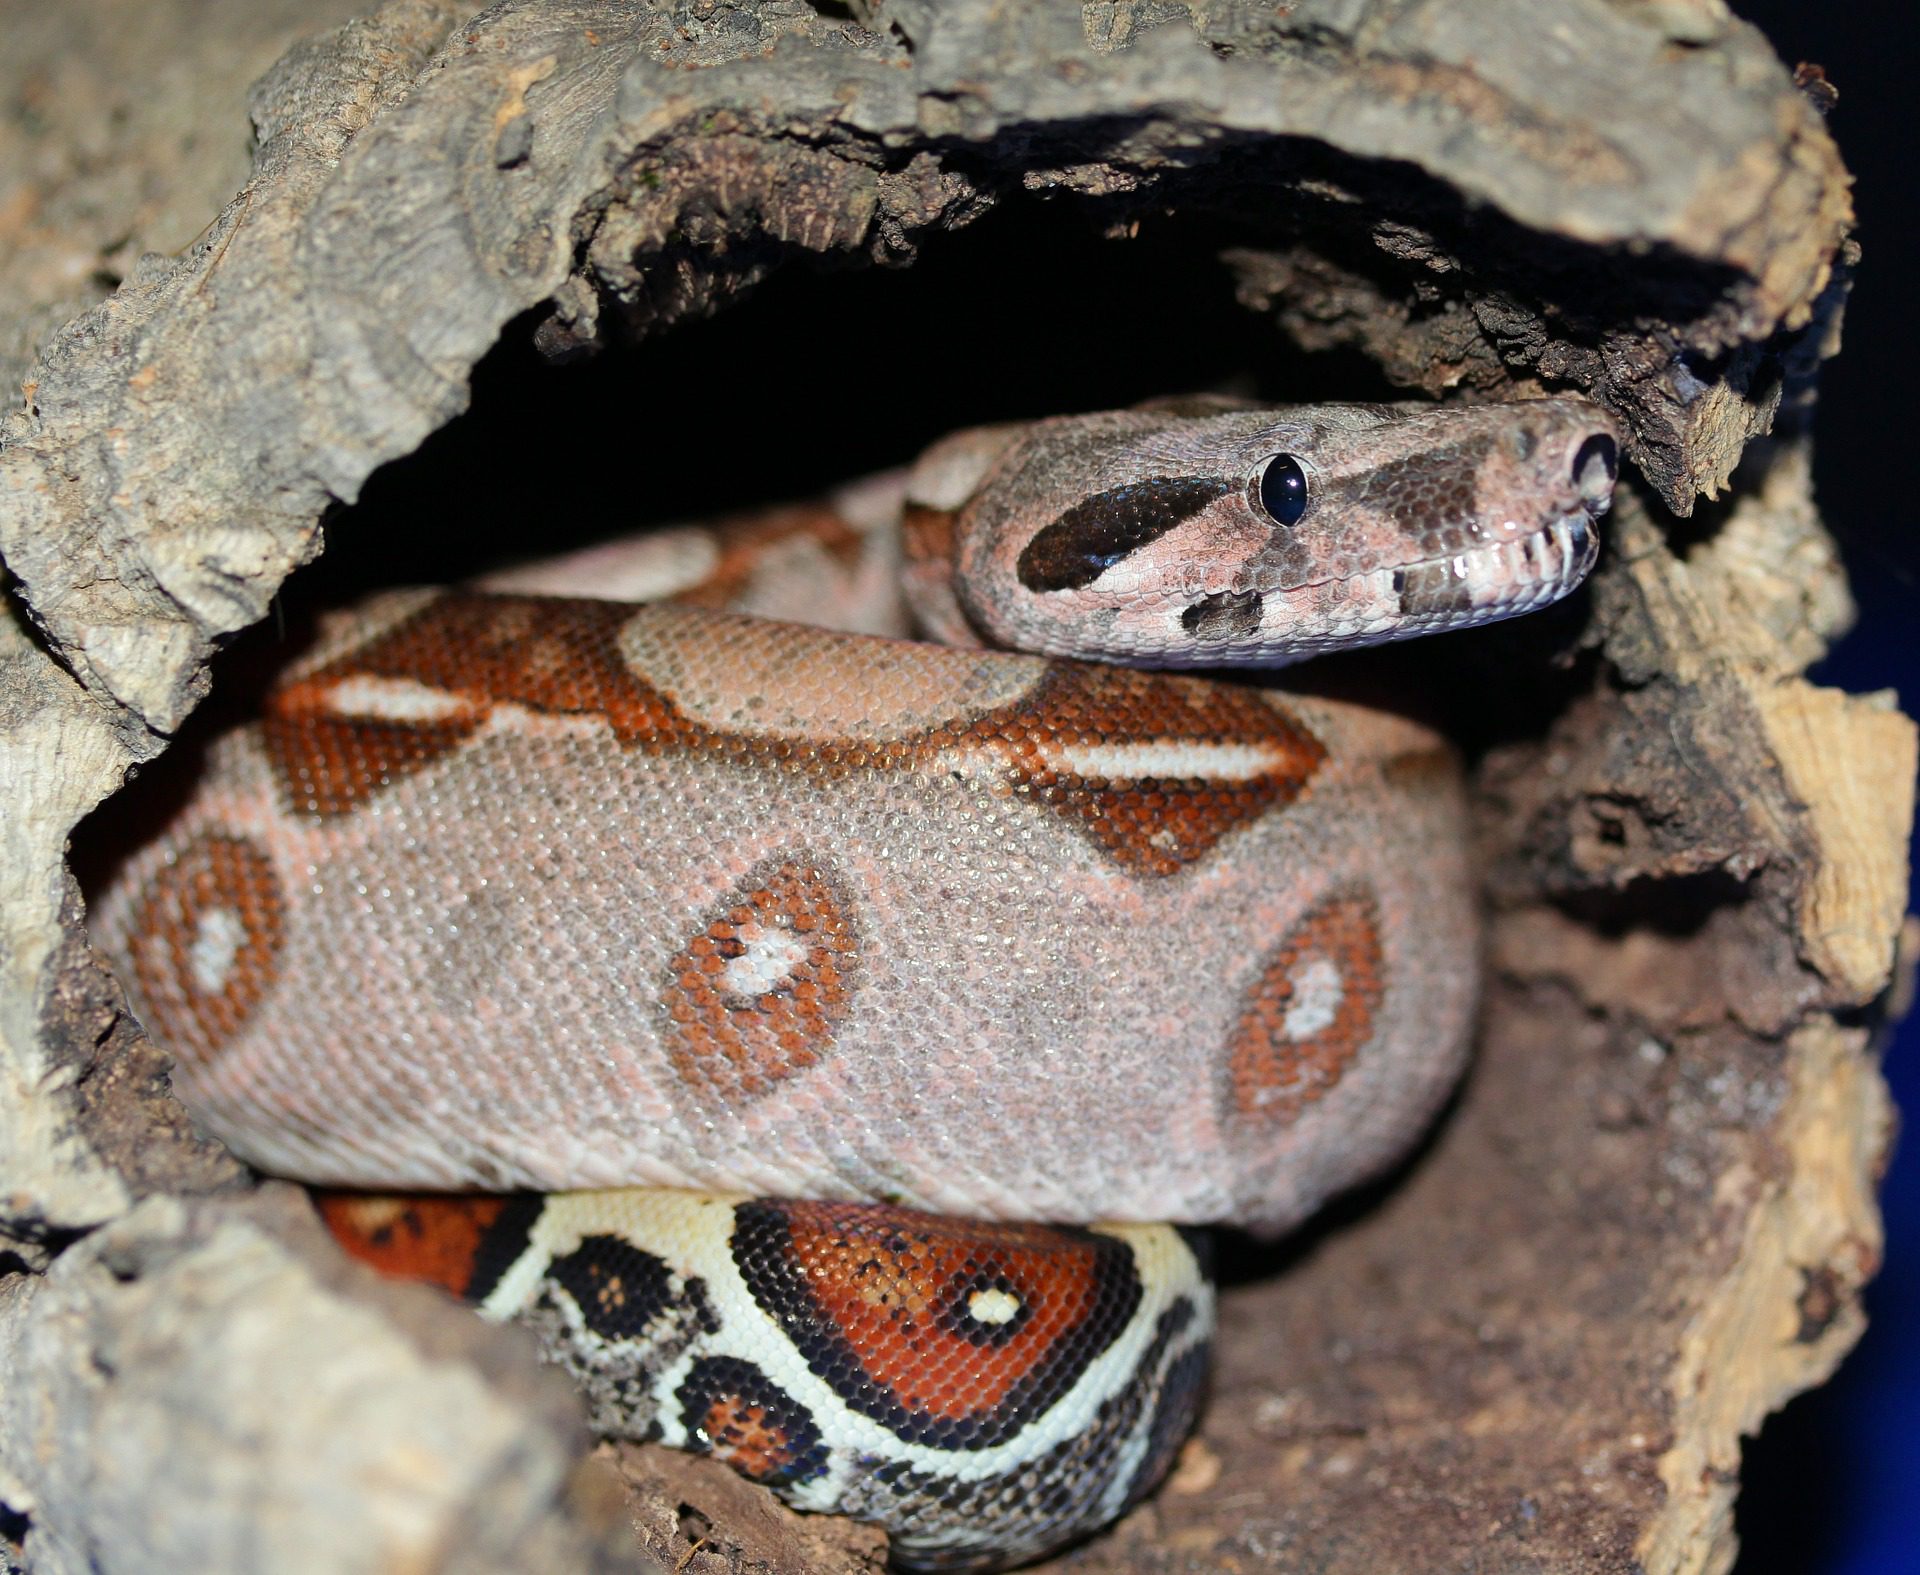 Columbian Red Tailed Boa - Emperor Snake